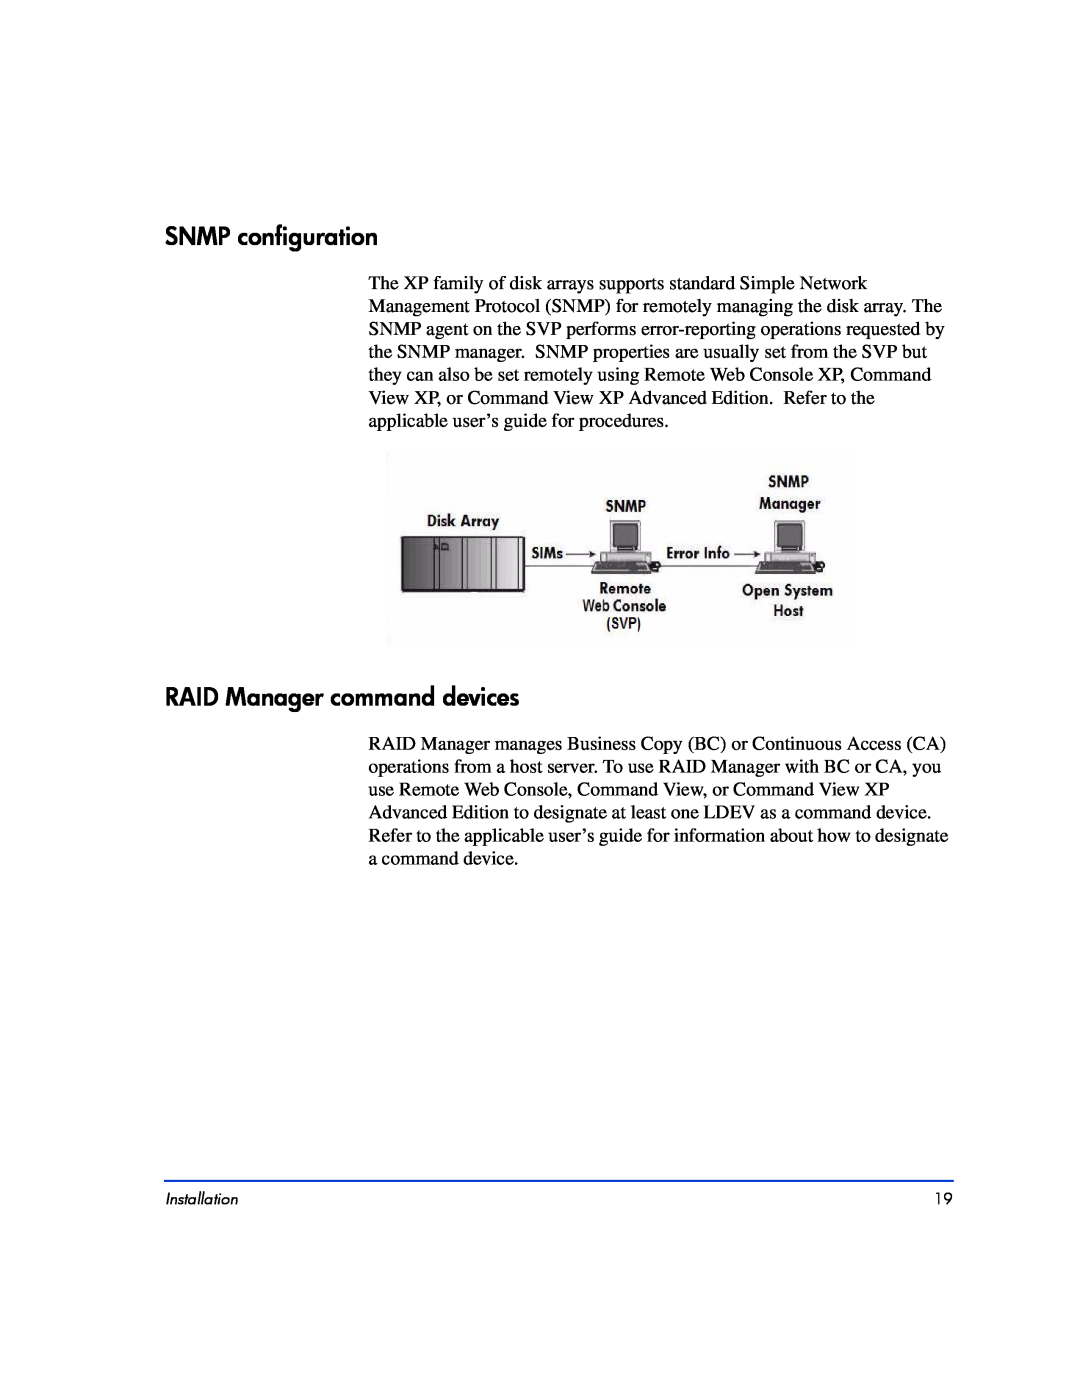 HP XP10000, XP128 manual SNMP configuration, RAID Manager command devices 